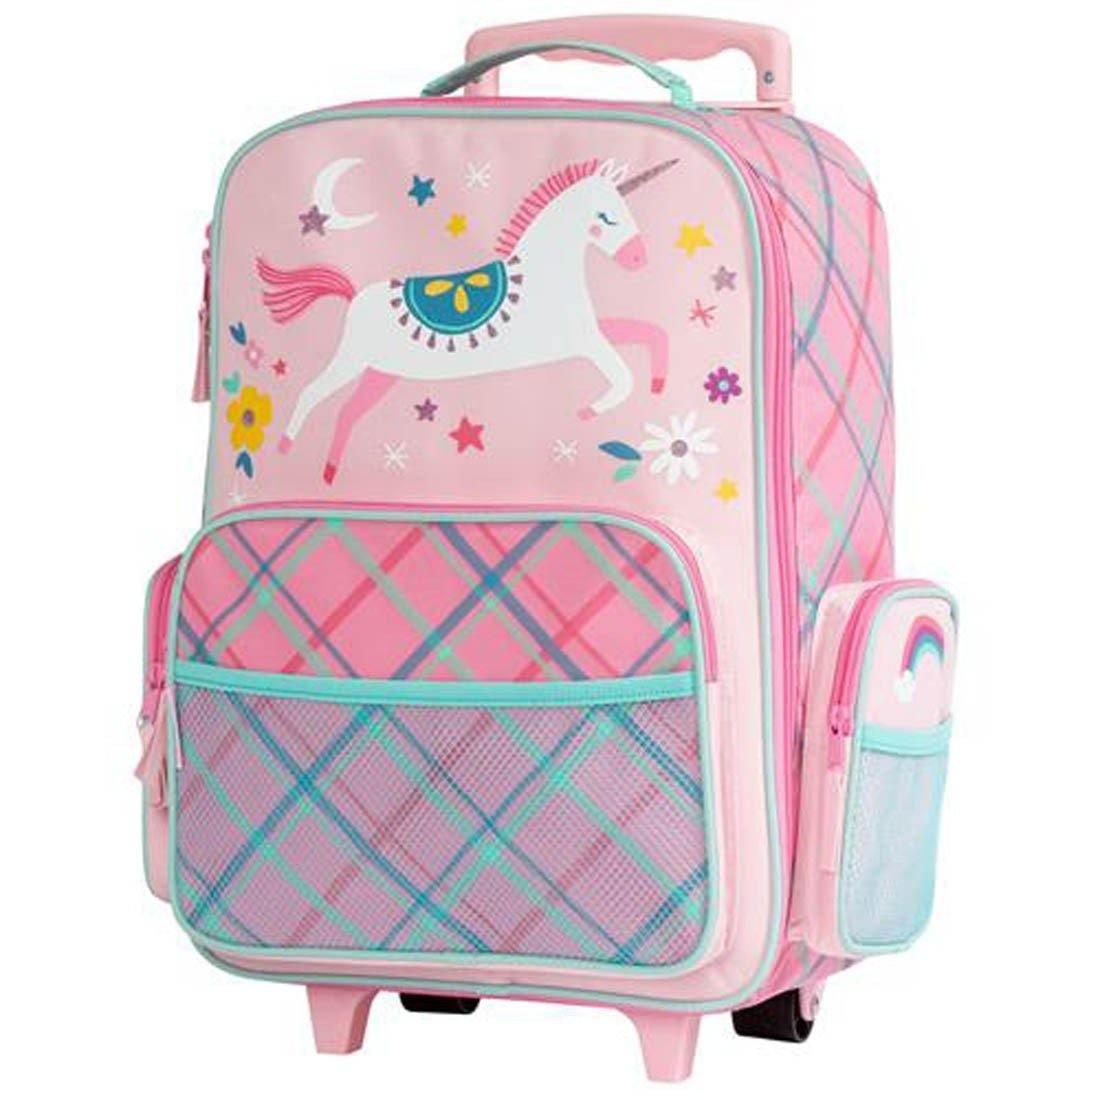 Stephen Joseph Classic Rolling Luggage 18 inch Pink Unicorn - BumbleToys - 5-7 Years, Backpack, Cecil, Girls, Pre-Order, School Supplies, Stephen Joseph 2023